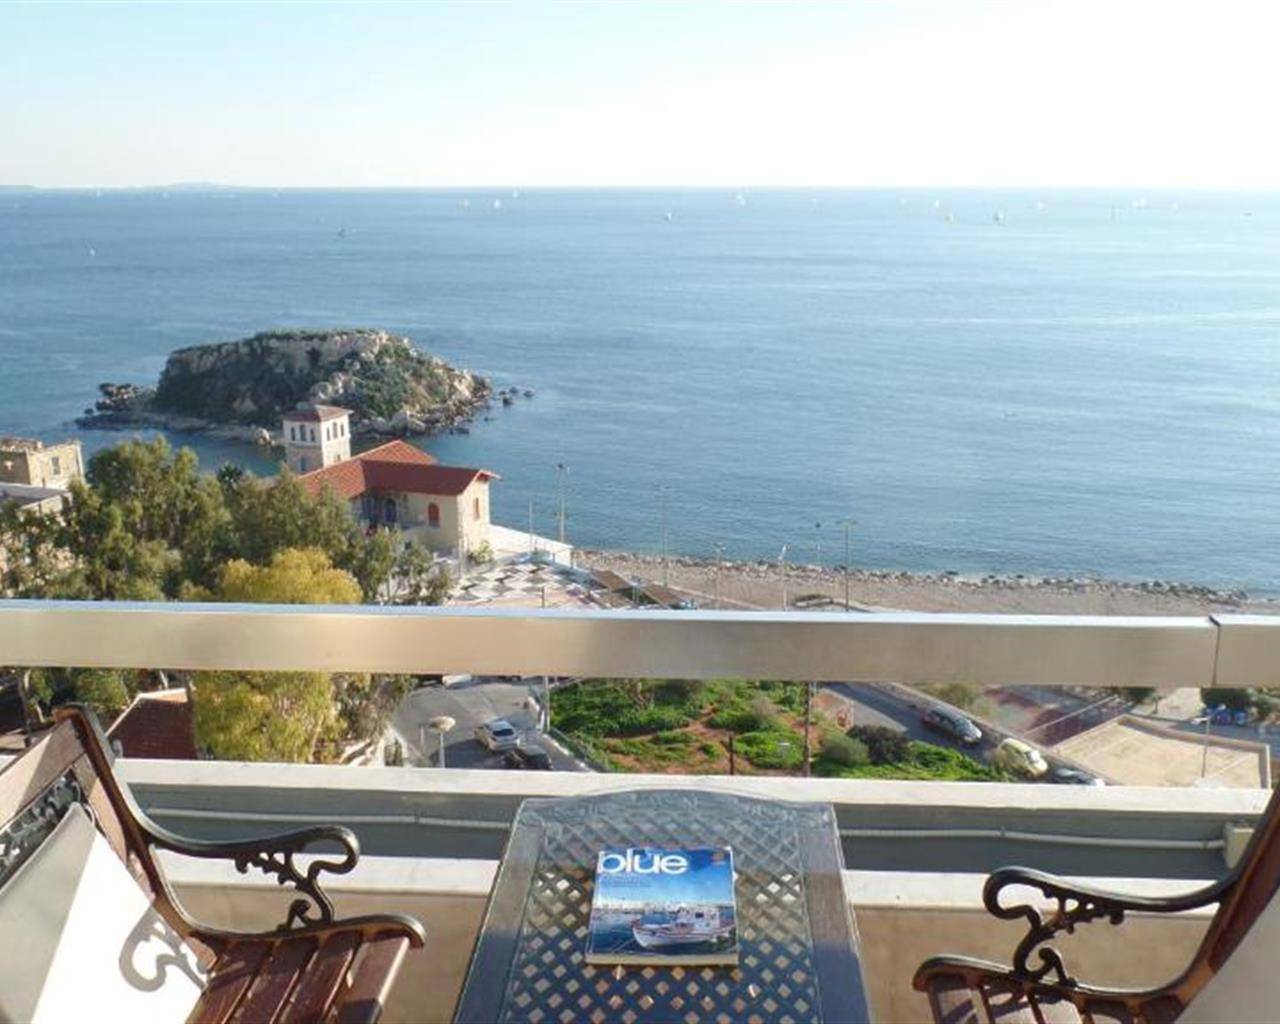 Charming Boutique Hotel with Magnificent views of the Saronic Gulf in Kastella, Piraeus